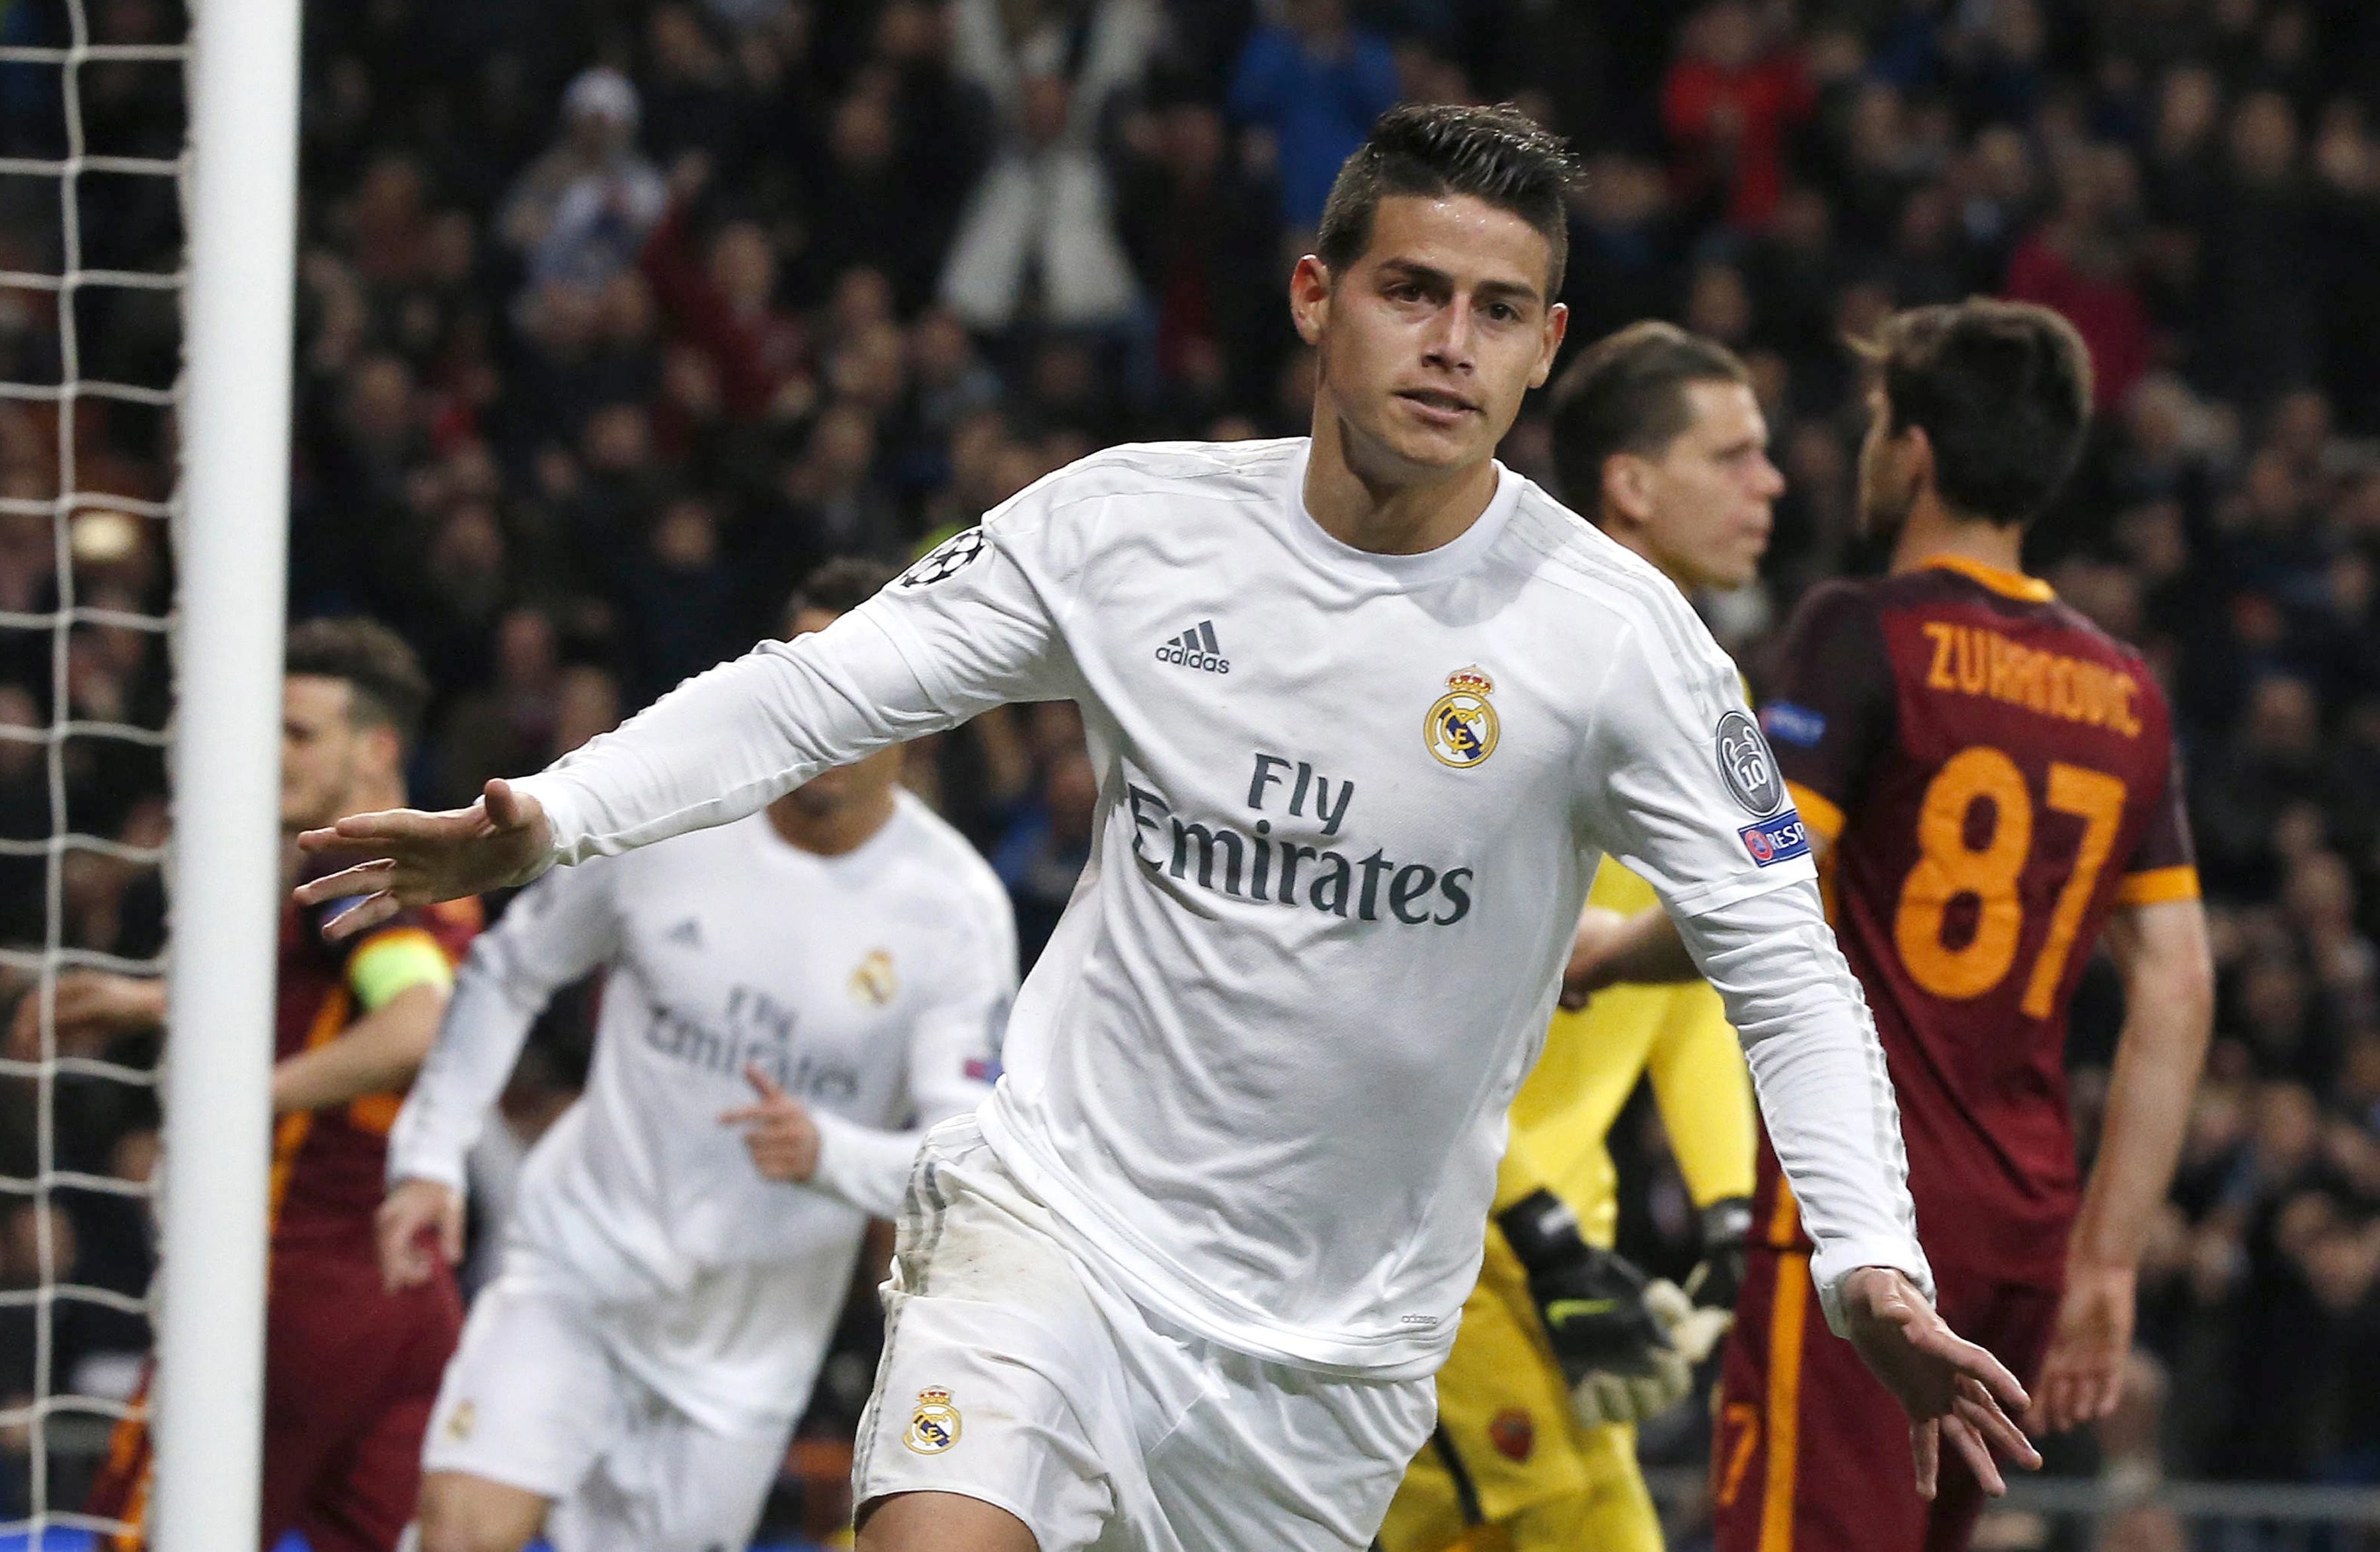 Real Madrid's Colombian midfielder James Rodriguez jublates his goal against AS Roma during their Champions League round of 16 second leg match played at Santiago Bernabeu stadium in Madrid, Spain, 08 March 2016.  (Photo by Kiko Huesca/EPA)